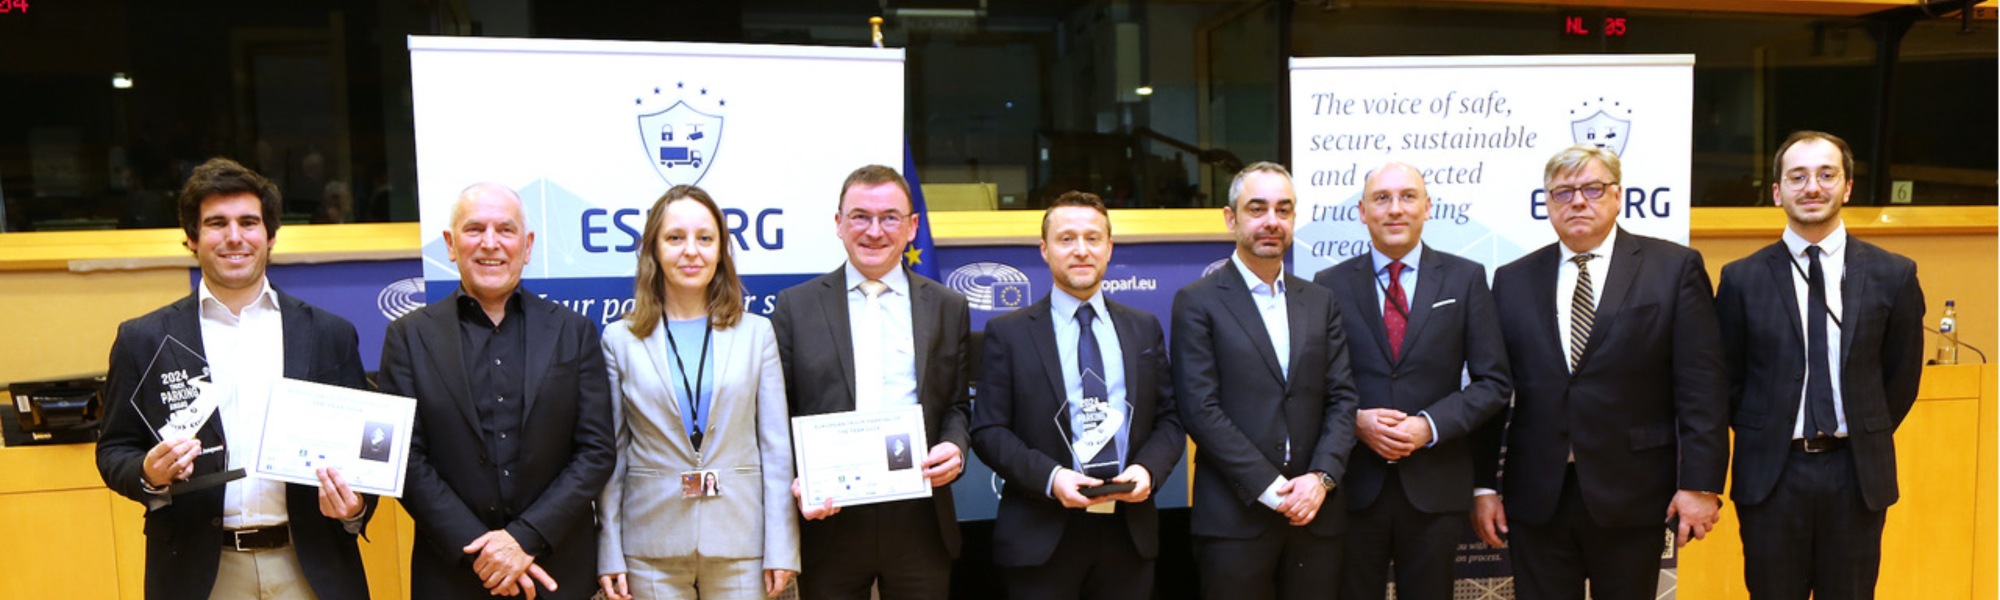 IRU has reiterated the urgent need for more safe and secure parking areas across Europe at a conference in the European Parliament. The debate was followed by the European Truck Parking Award ceremony. The winners are located in France and Spain.